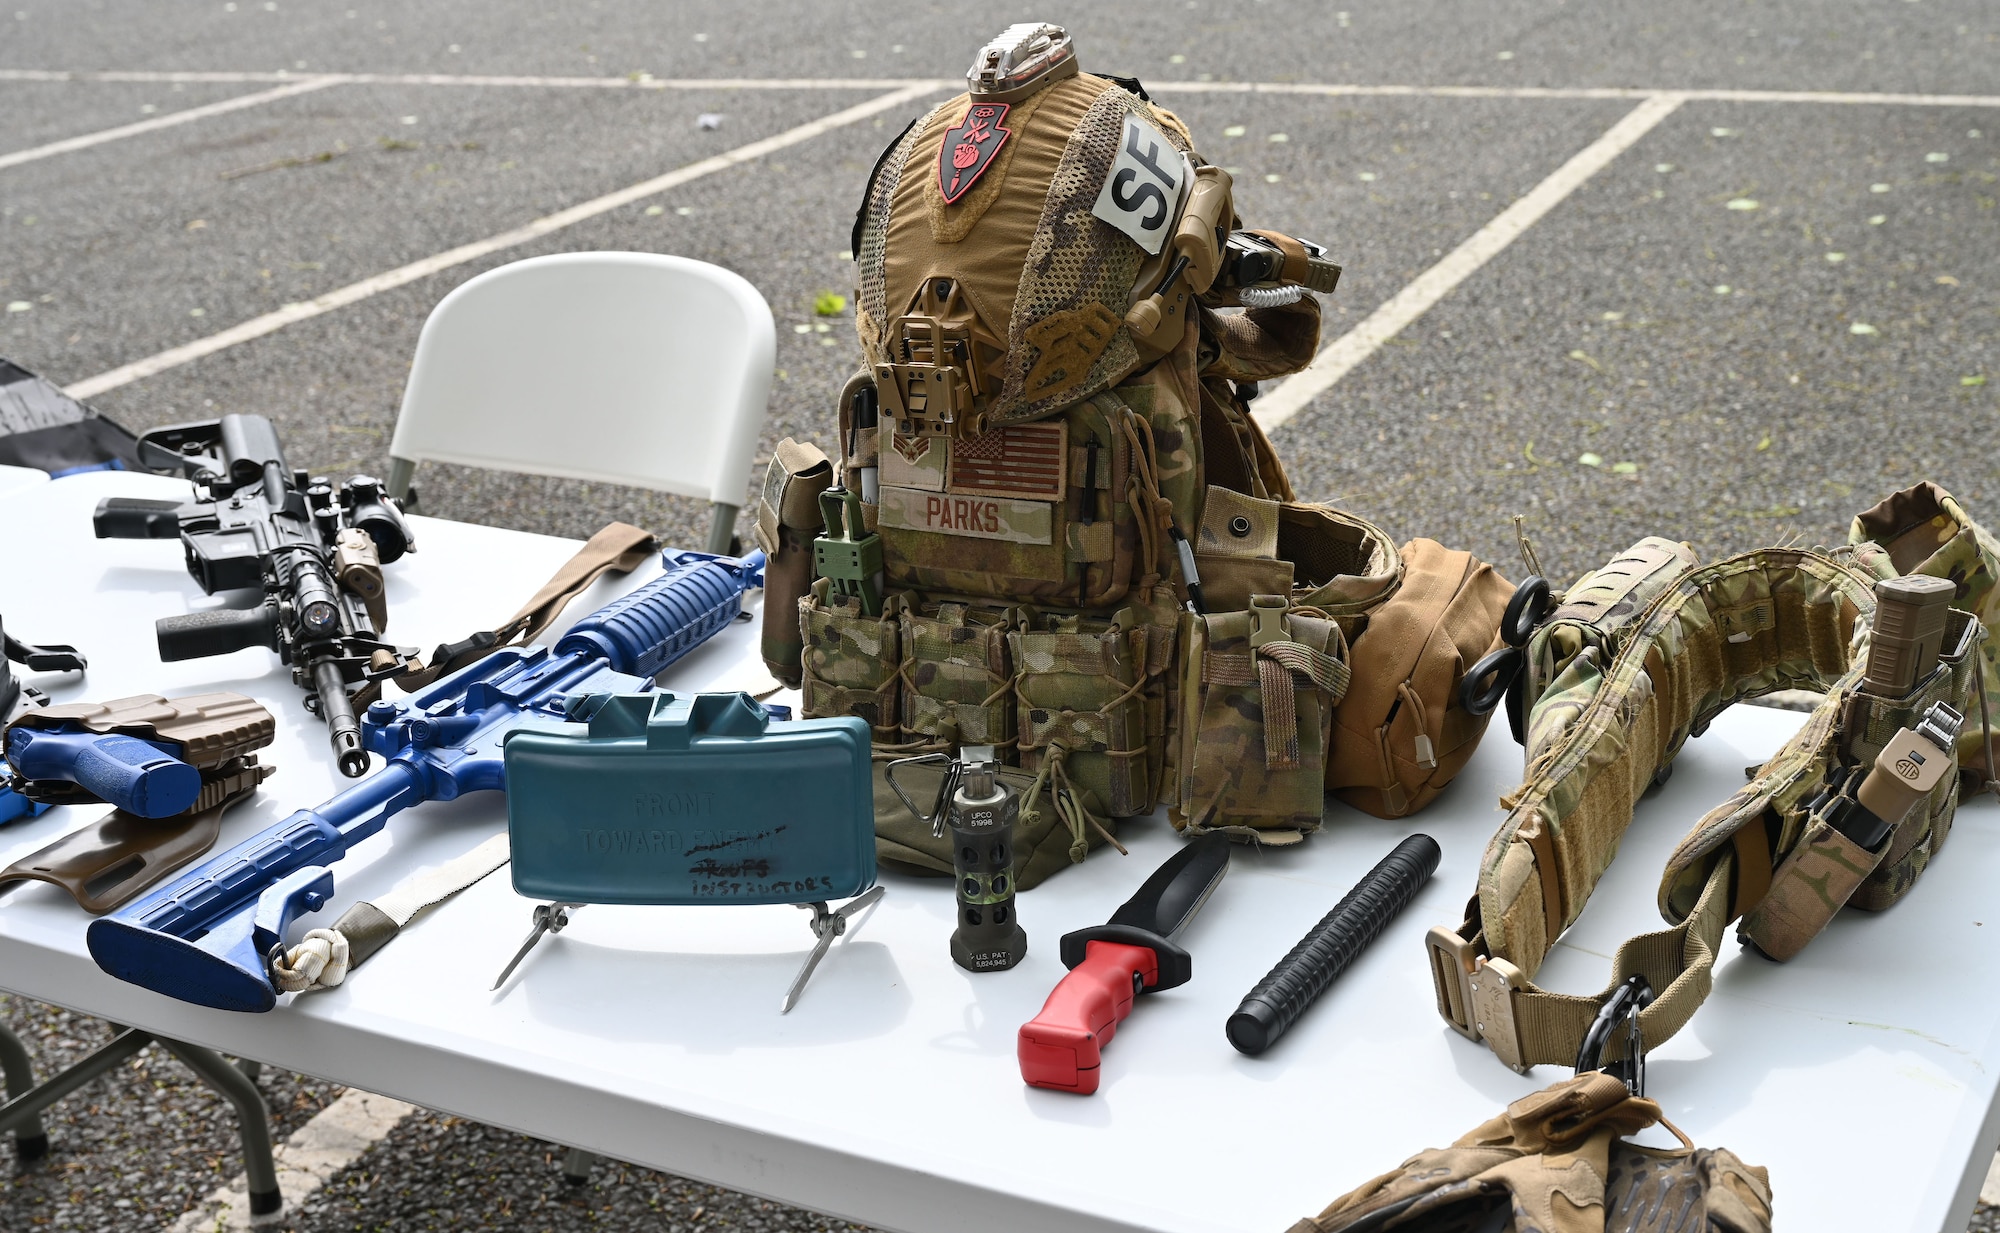 Protective gear belonging to the 100th Security Forces Squadron forms part of a display at the Police Week show-and-tell event at Royal Air Force Mildenhall, England, May 15, 2023. Police Week is held every year in May and this year is May 15 to 19. This year’s events include a ruck march, Defenders’ Challenge, “jail and bail,” and Fallen Defender memorial. (U.S. Air Force photo by Karen Abeyasekere)